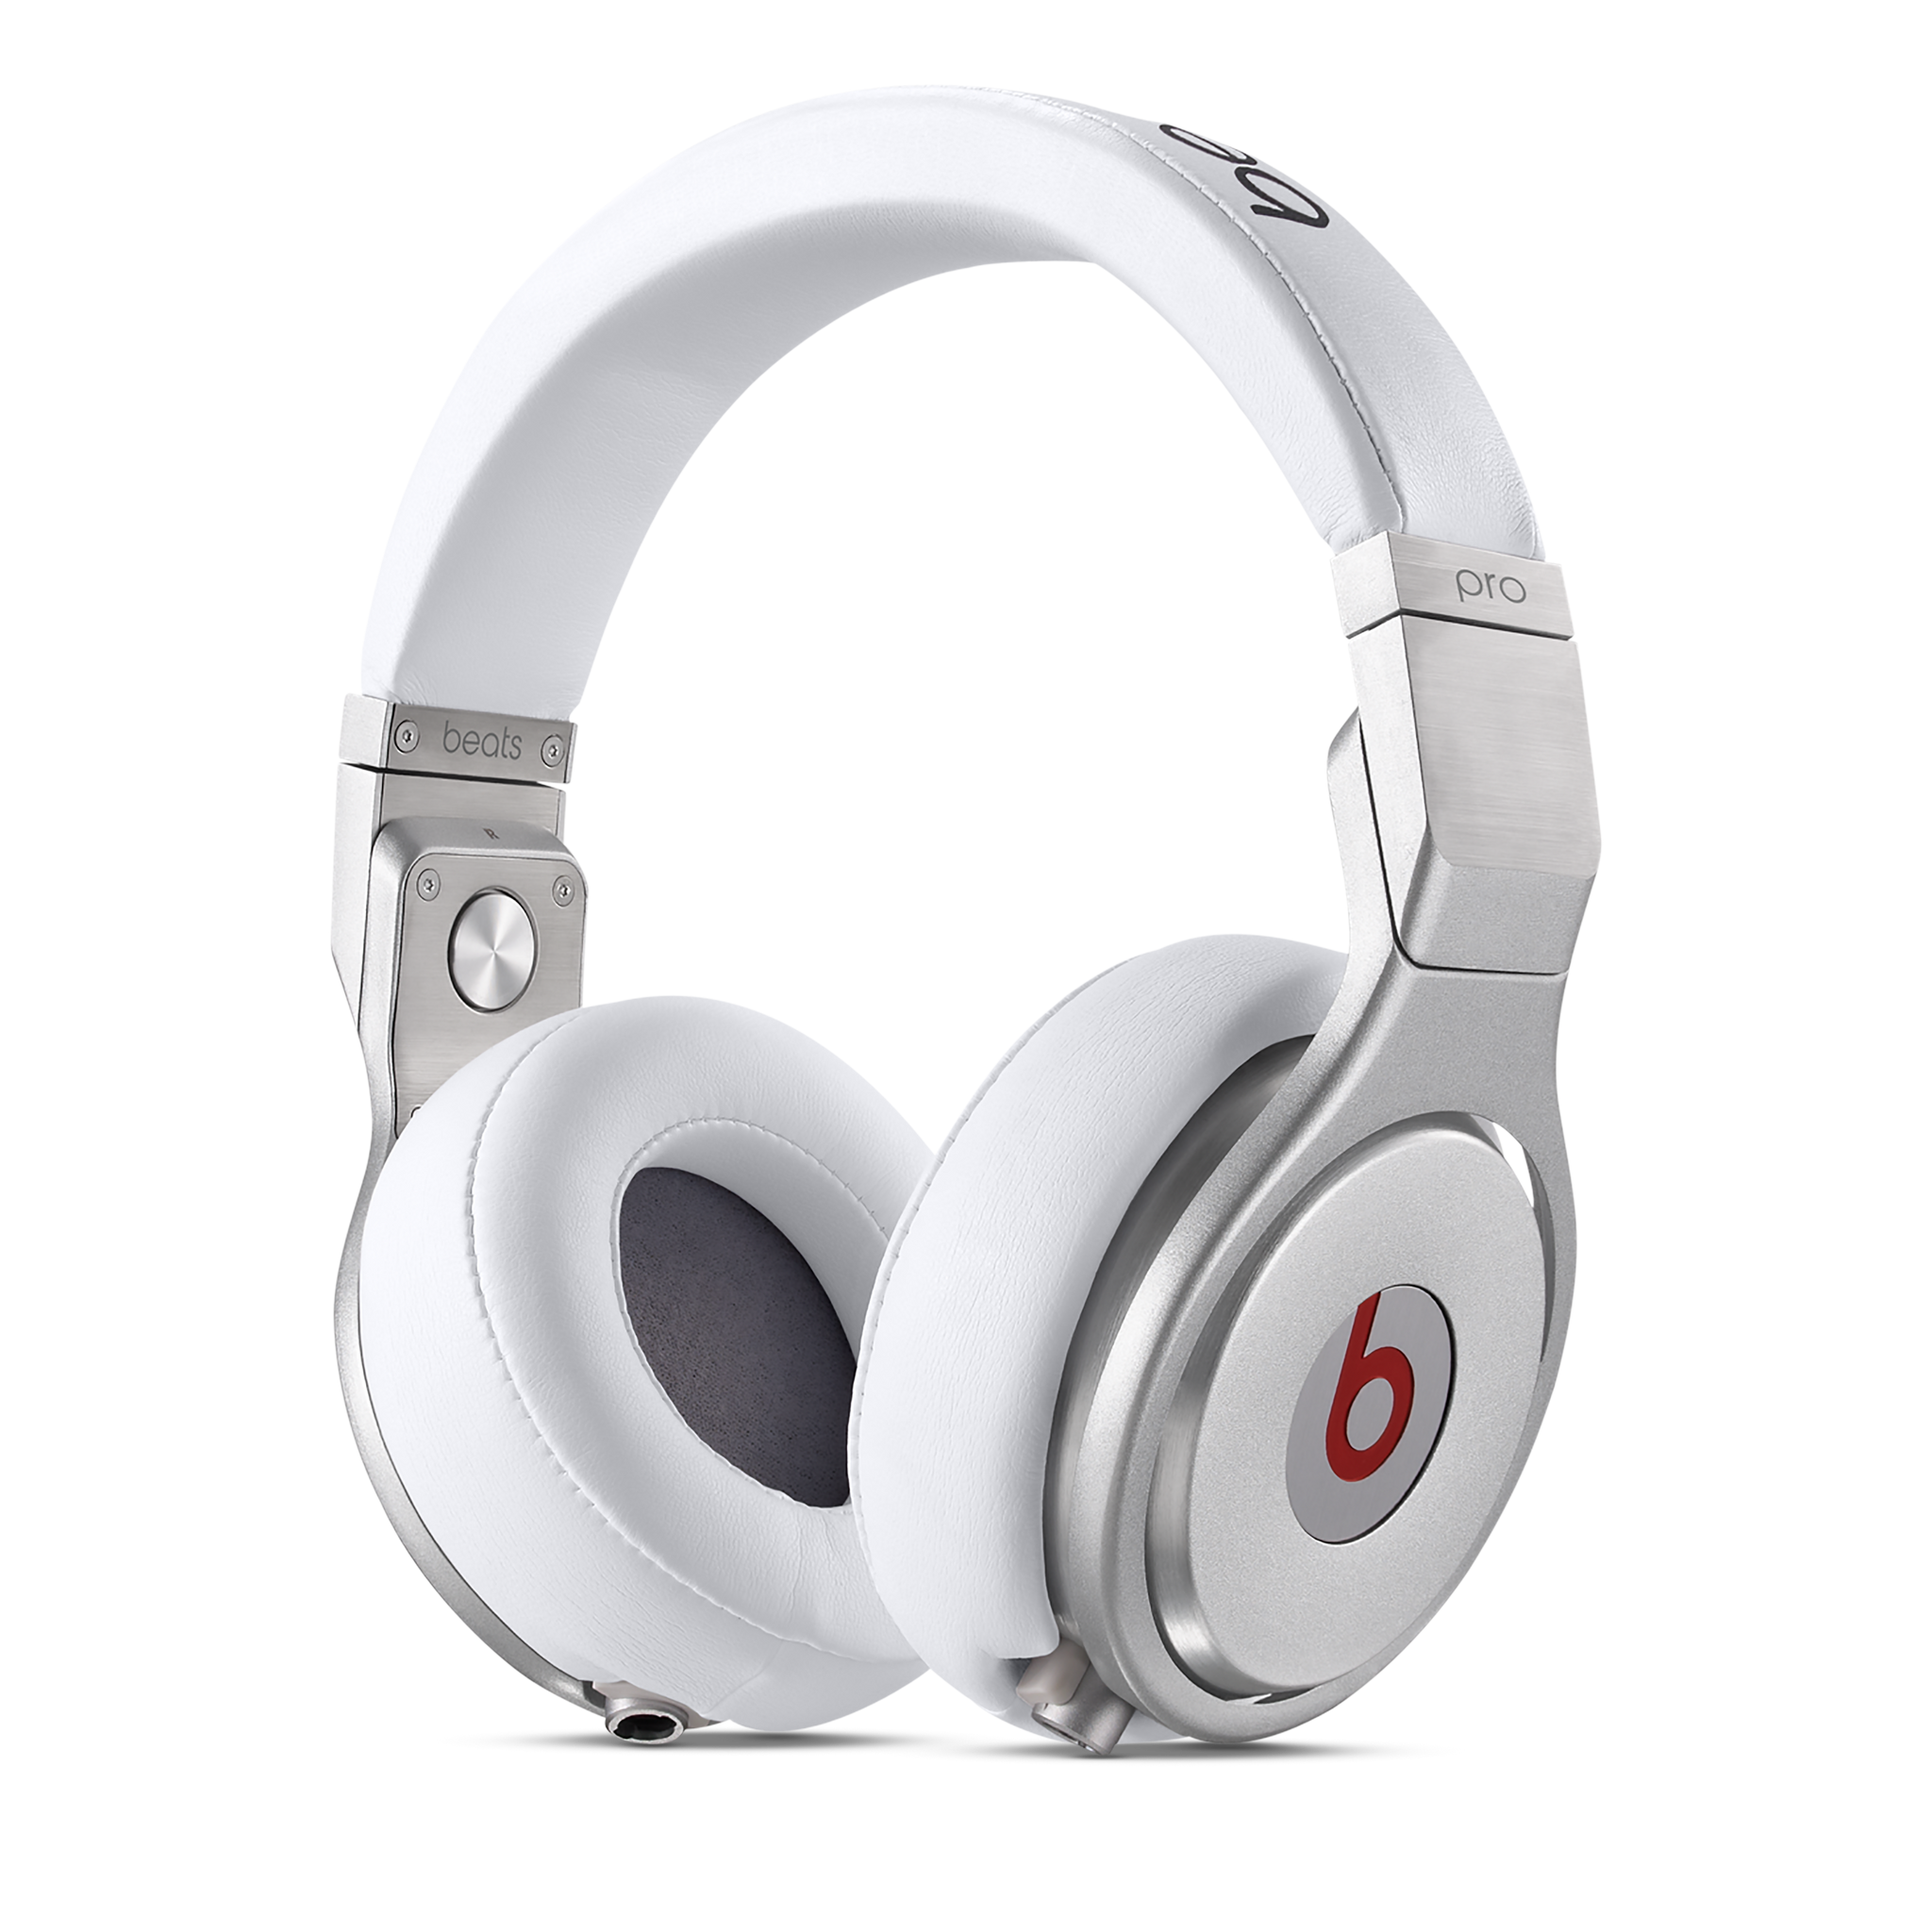 https://static.wikia.nocookie.net/beats/images/a/a8/Beats_Pro_white_front.png/revision/latest?cb=20221213110118